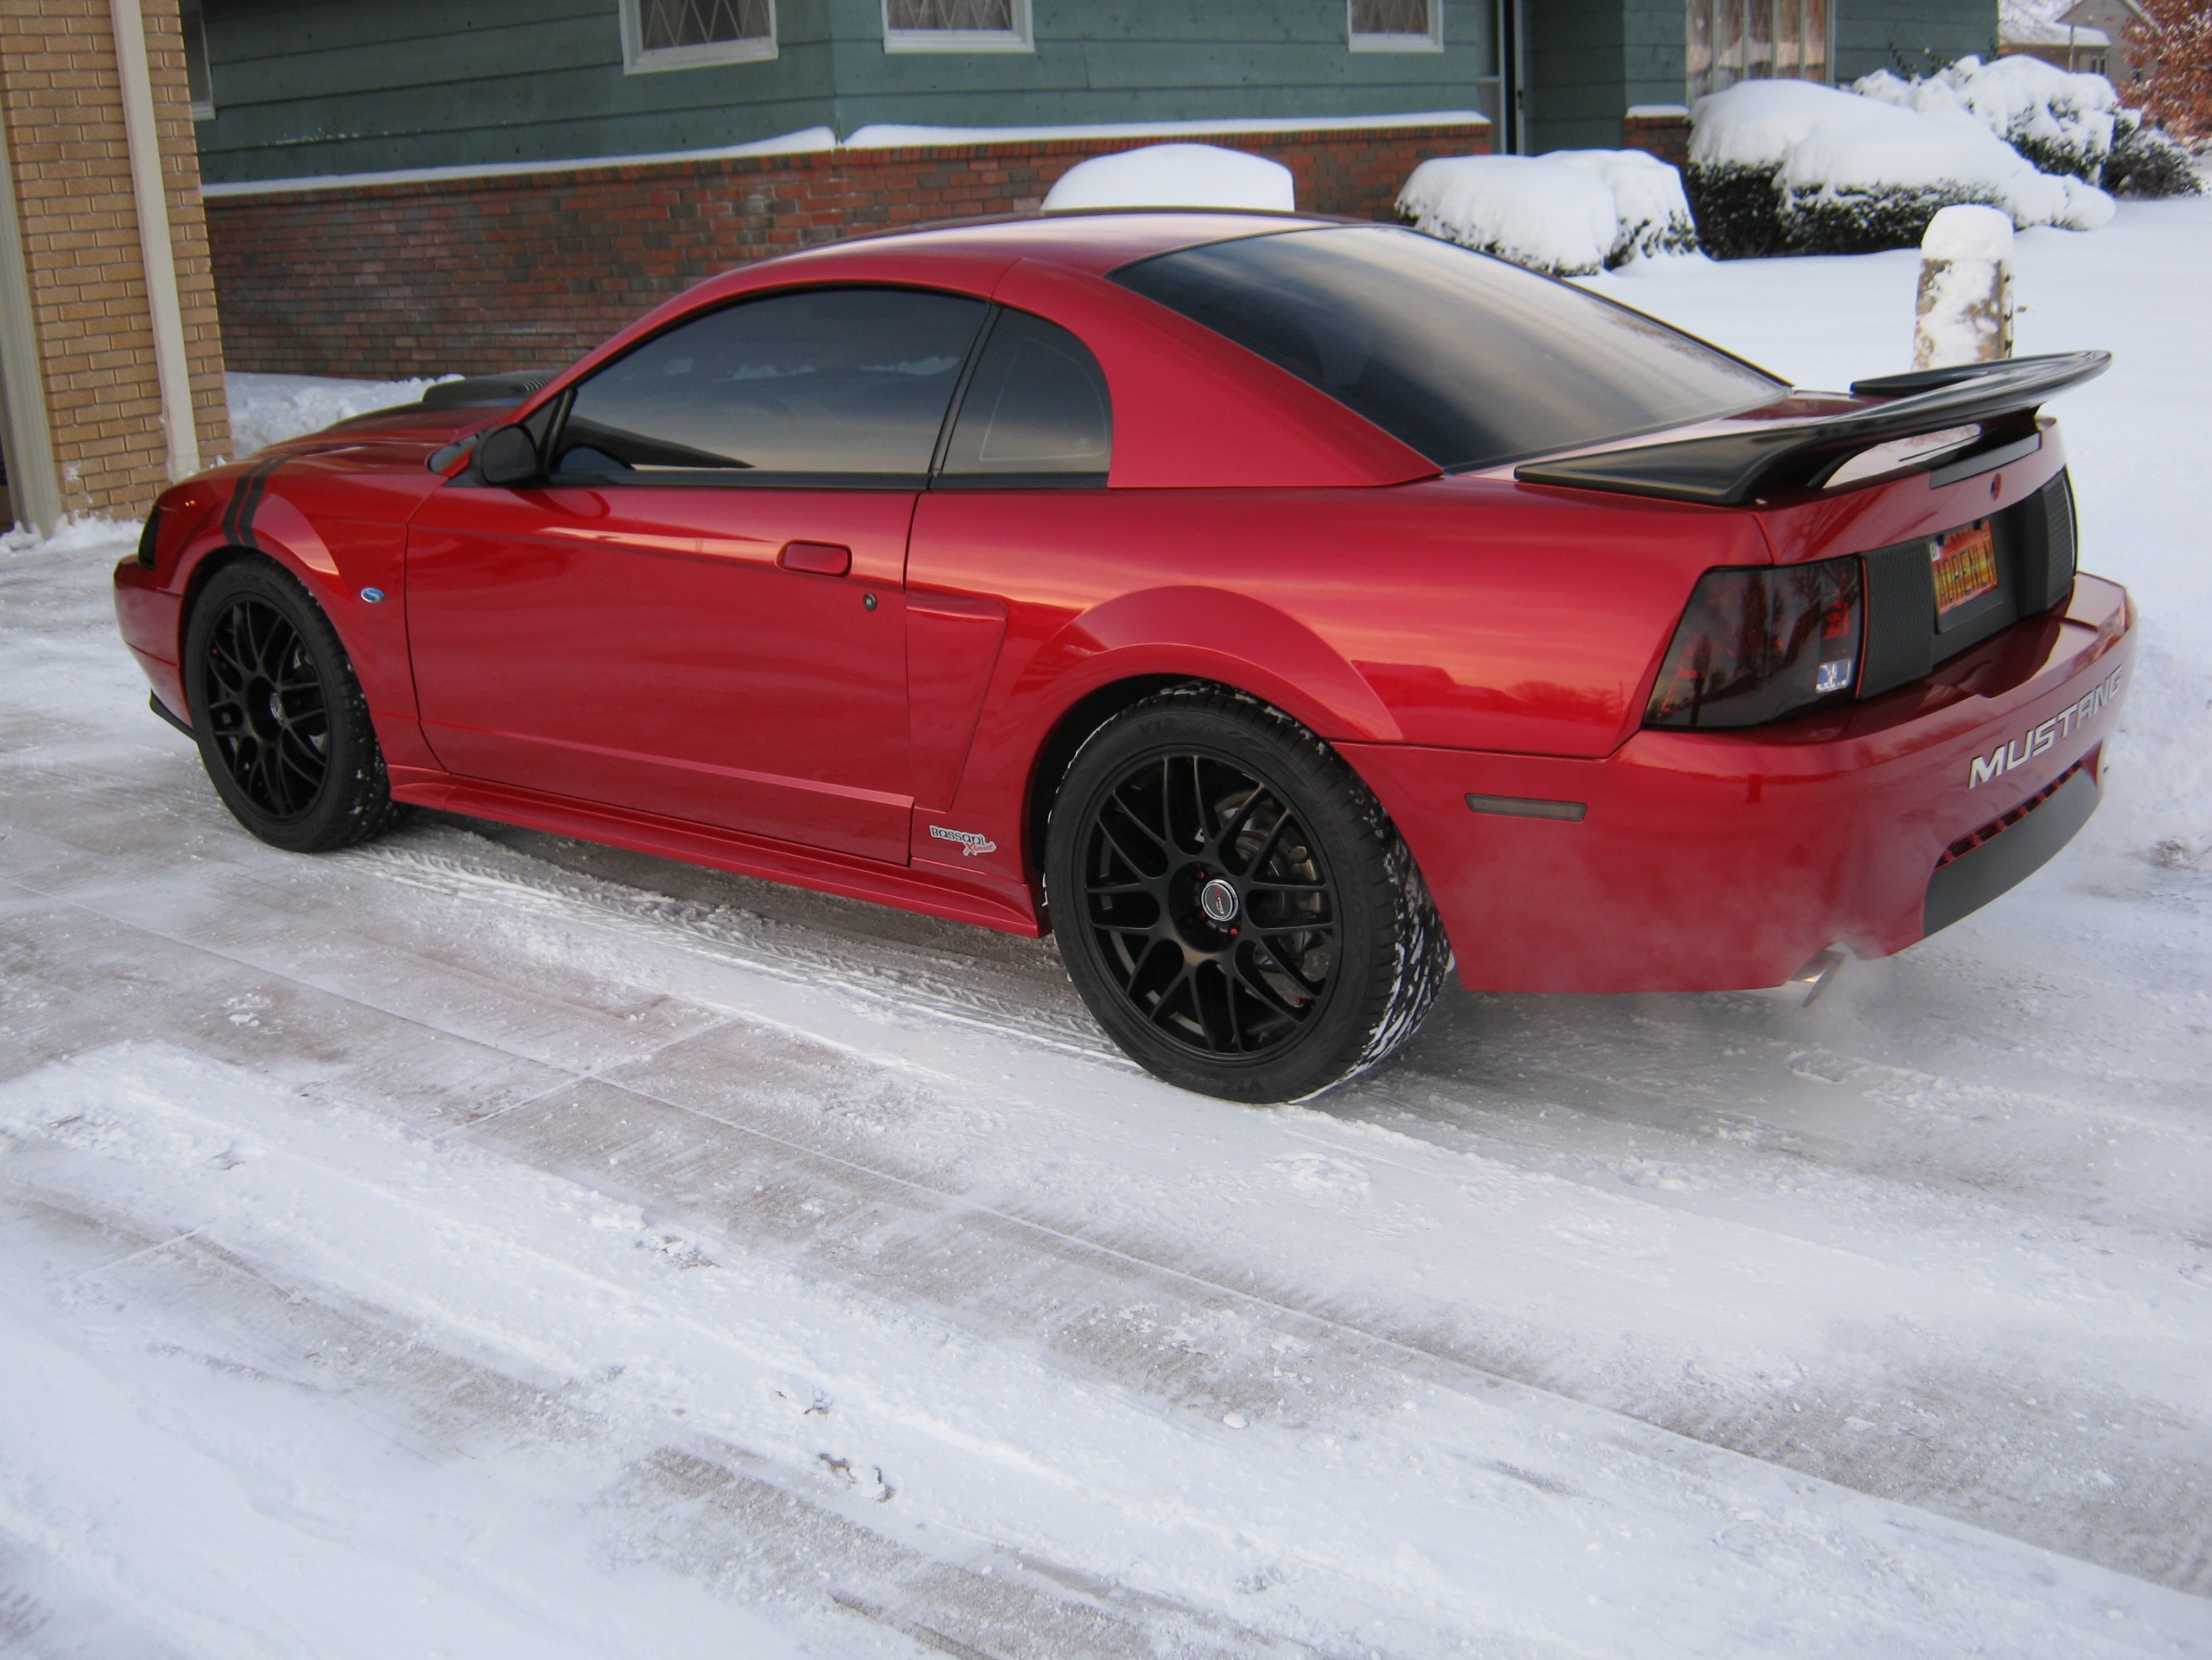 Laser Red in the Snow.